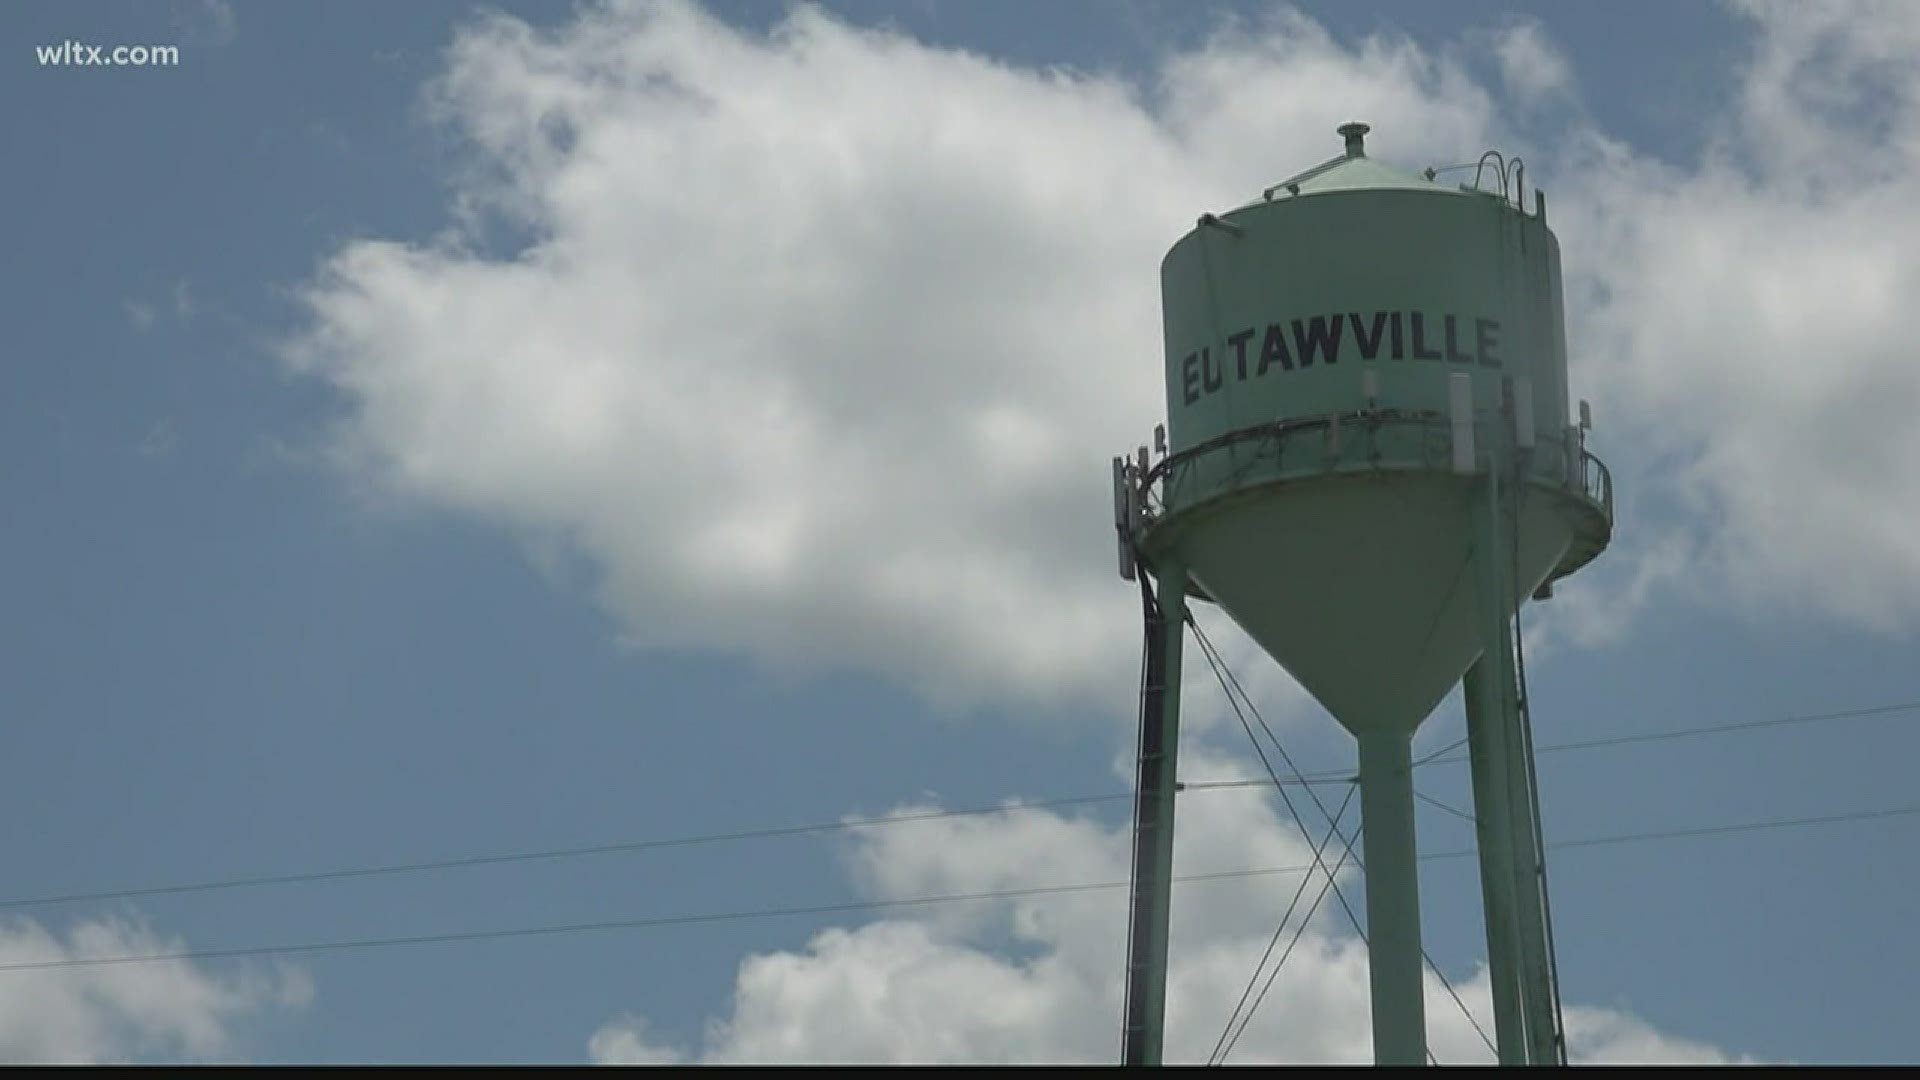 The town of Eutawville says it's tough for small businesses in the town.